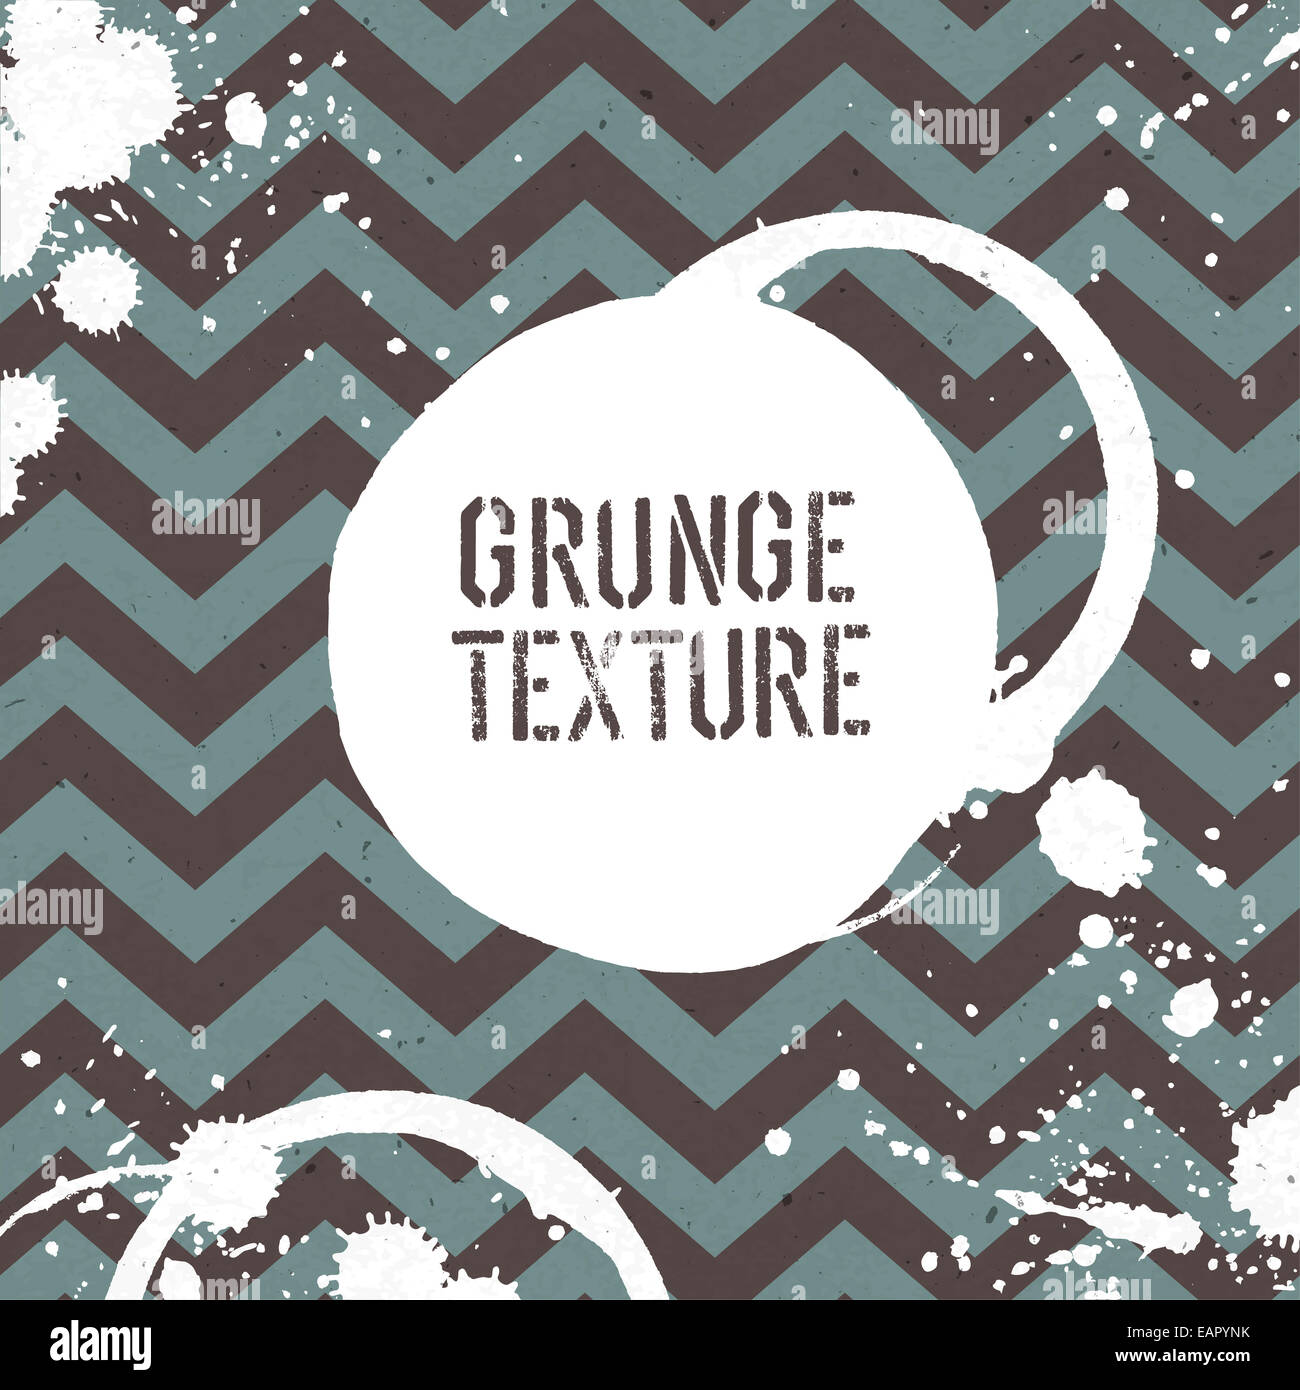 Grunge card. Zigzag pattern texture with stains. Vector Stock Photo